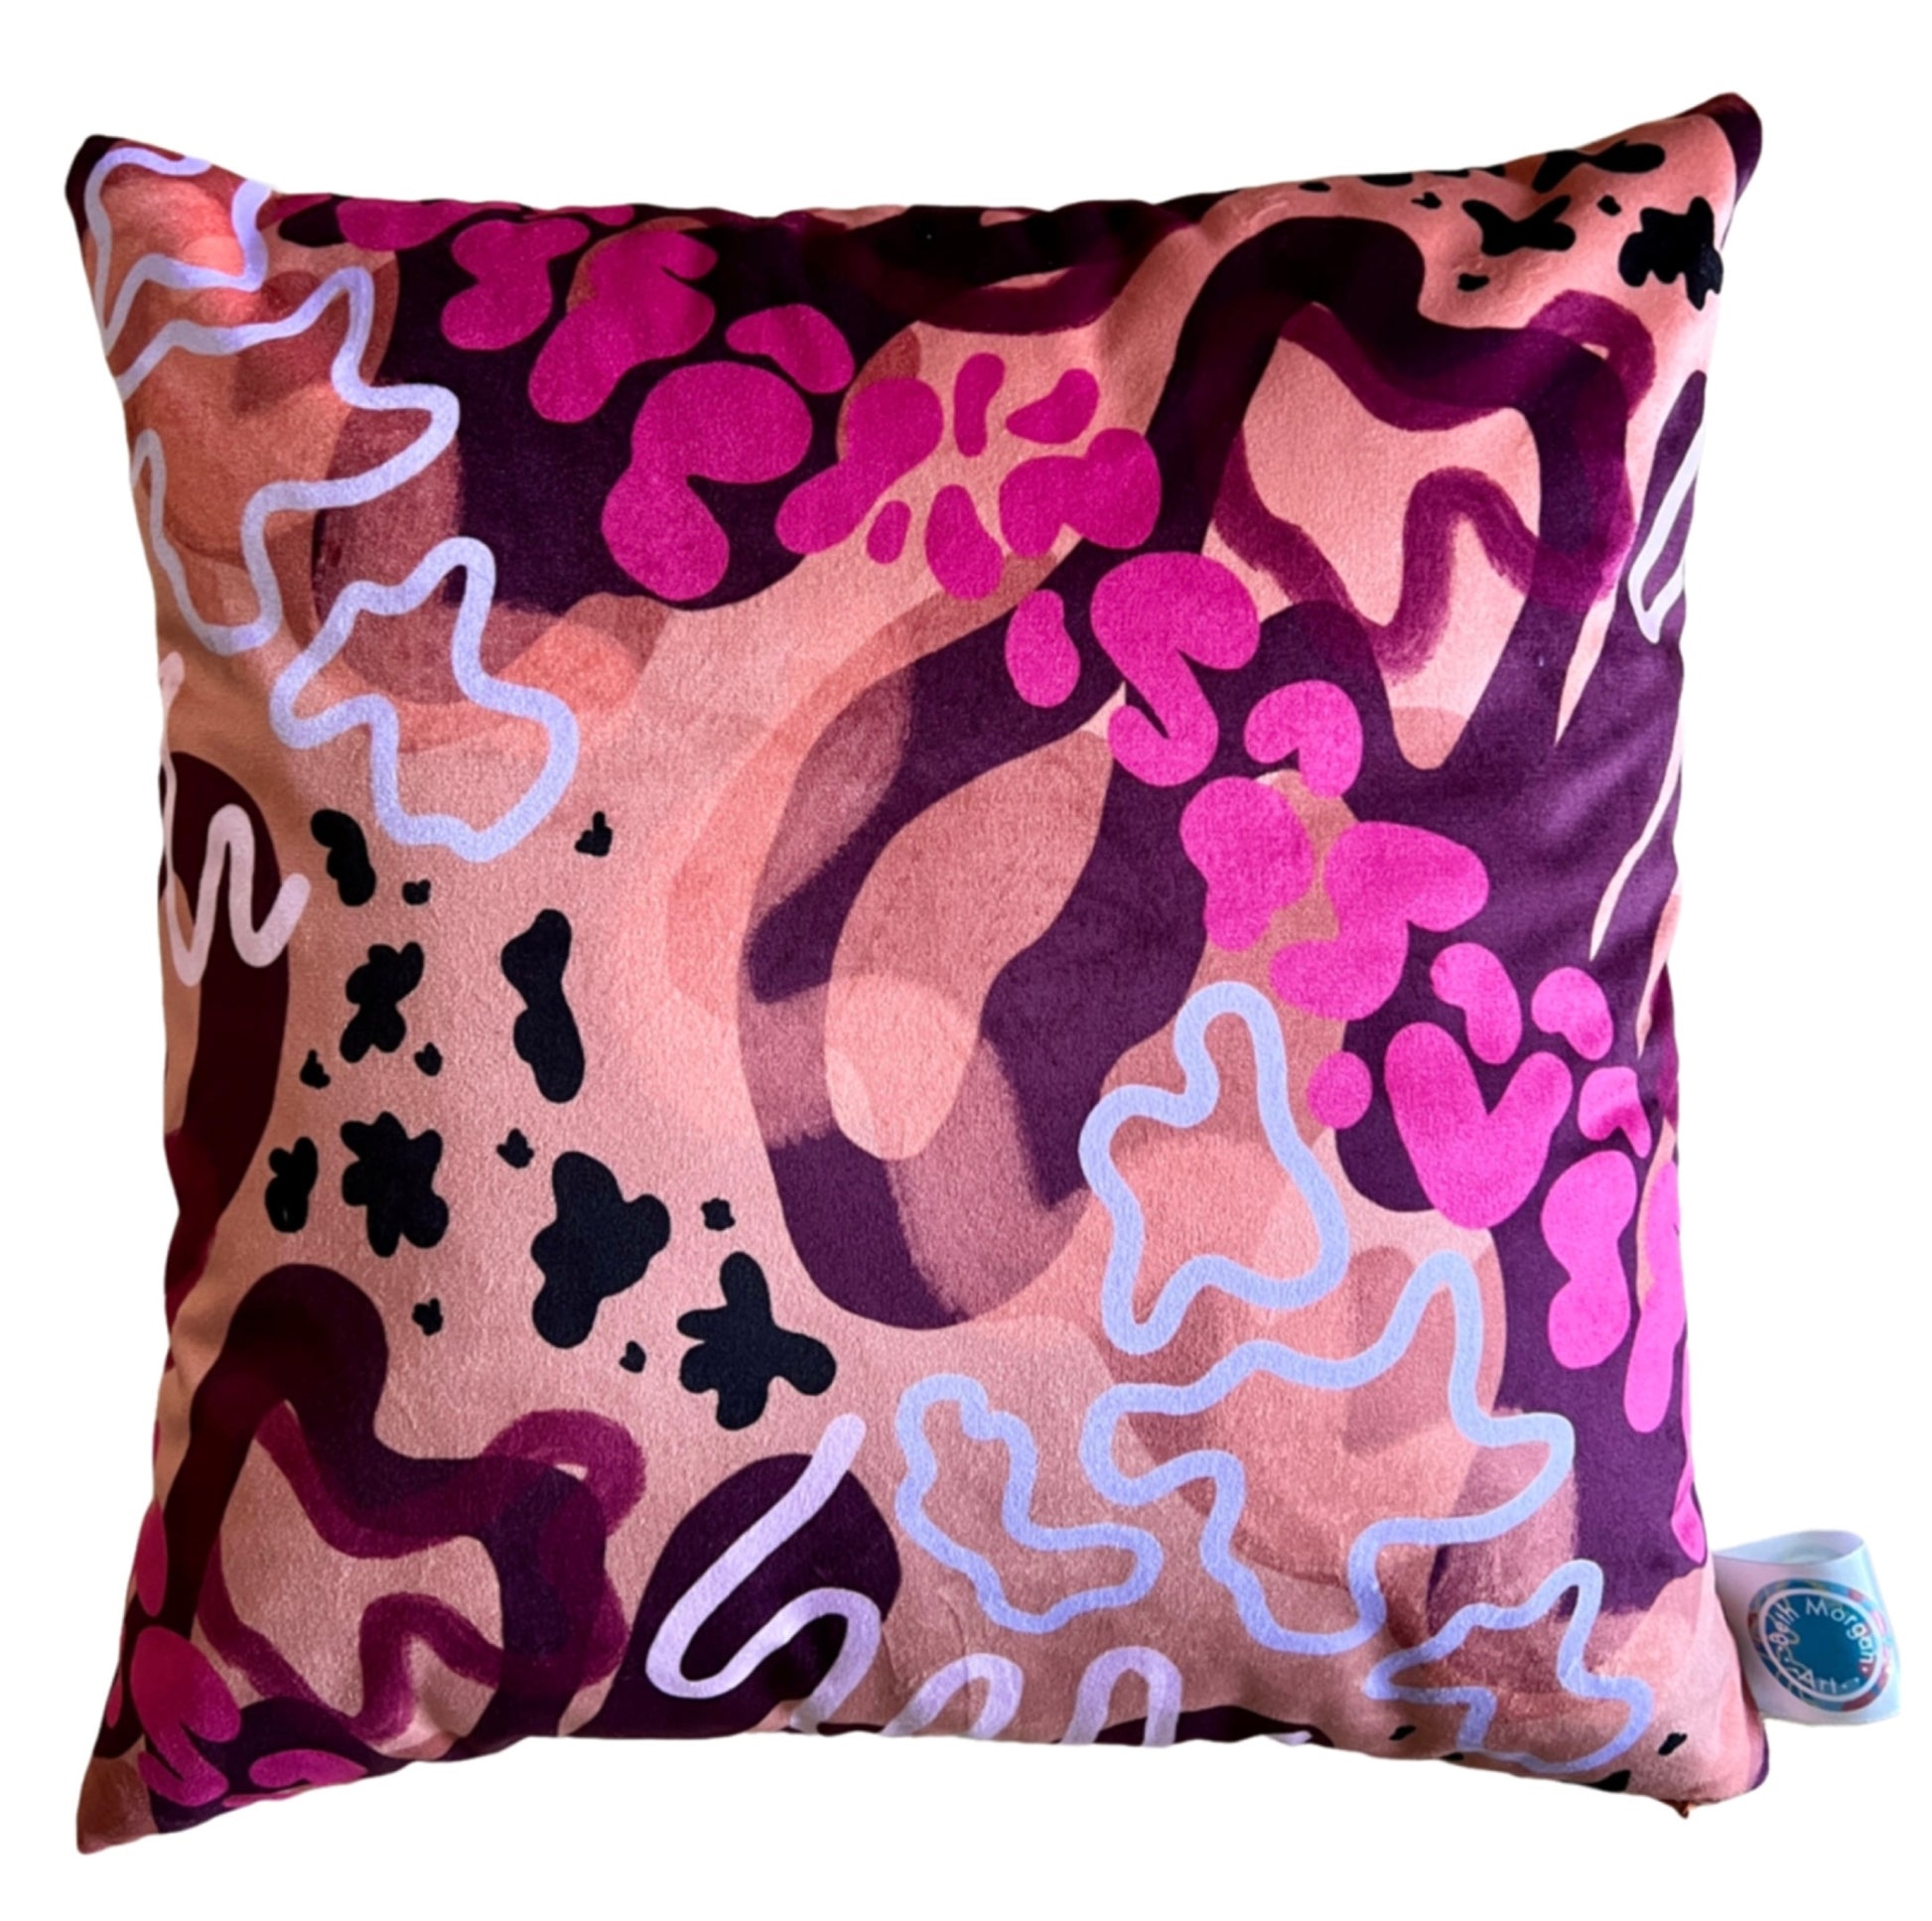 The front of the Sunset Cushion by Beth Morgan Art featuring bright pink print across an orange background with abstract shapes of dark purple.